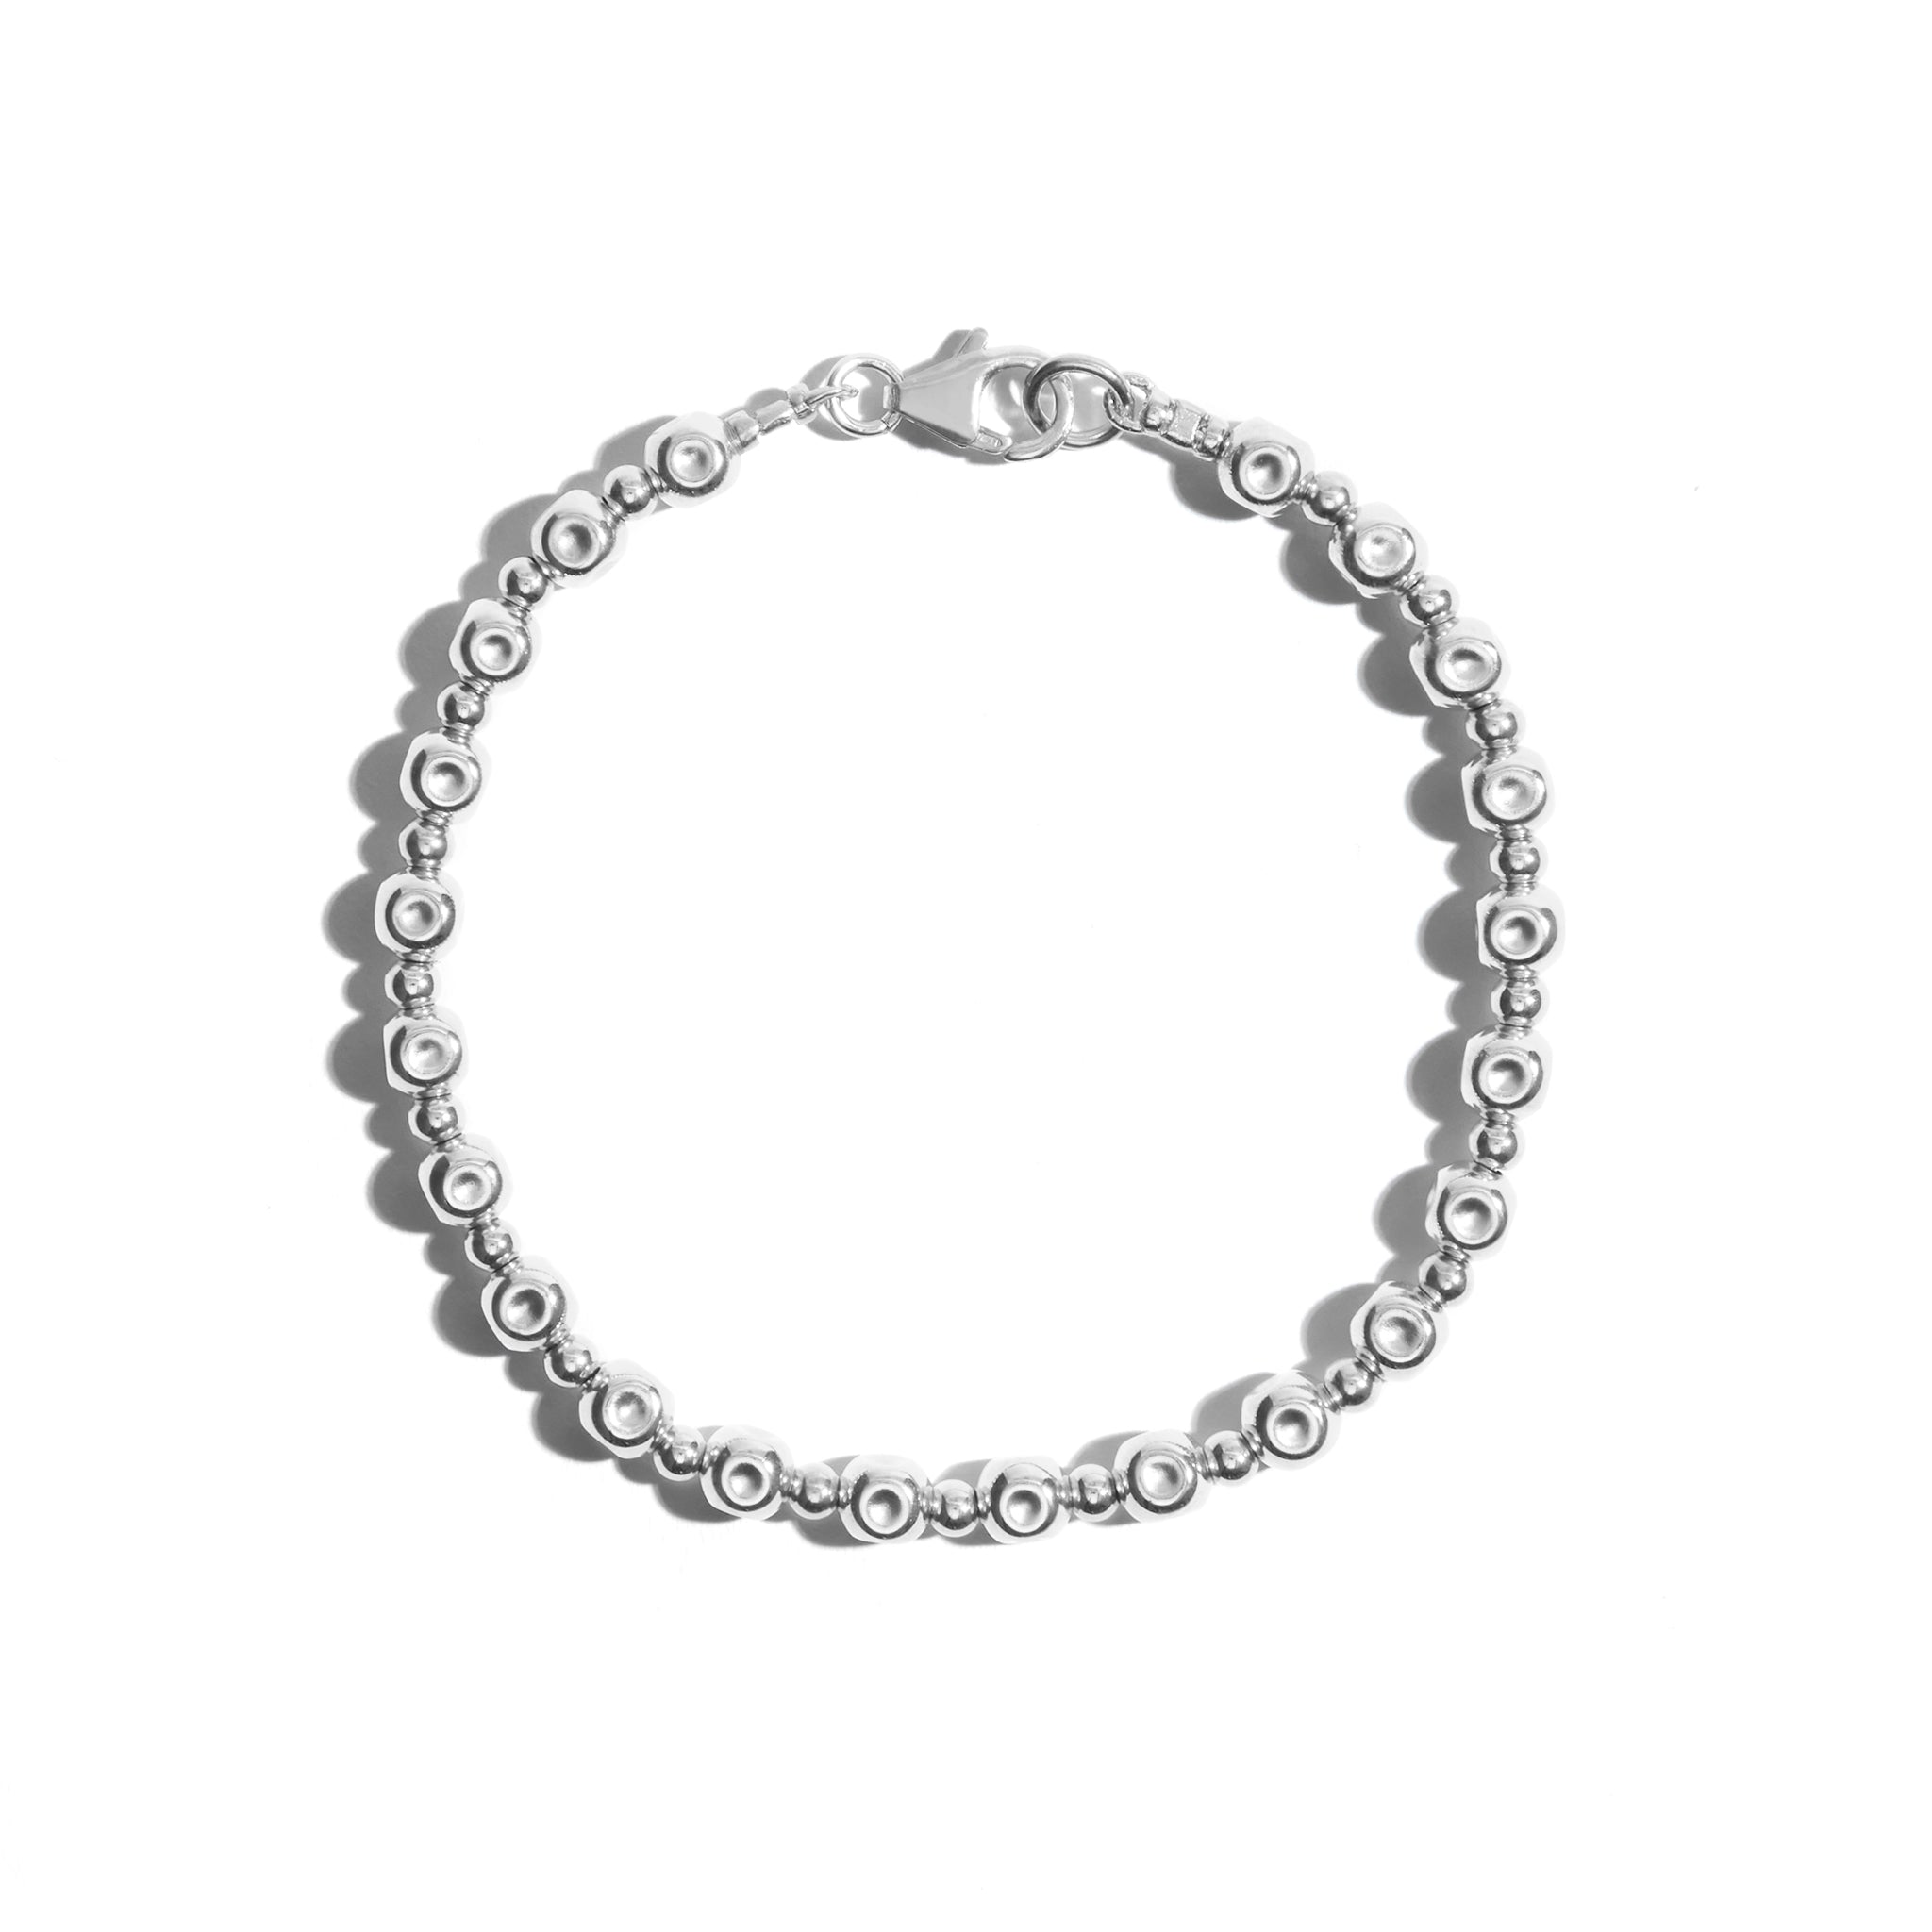 A stylish beaten beaded bracelet crafted from sterling silver perfect for adding a touch of sophistication to any outfit.